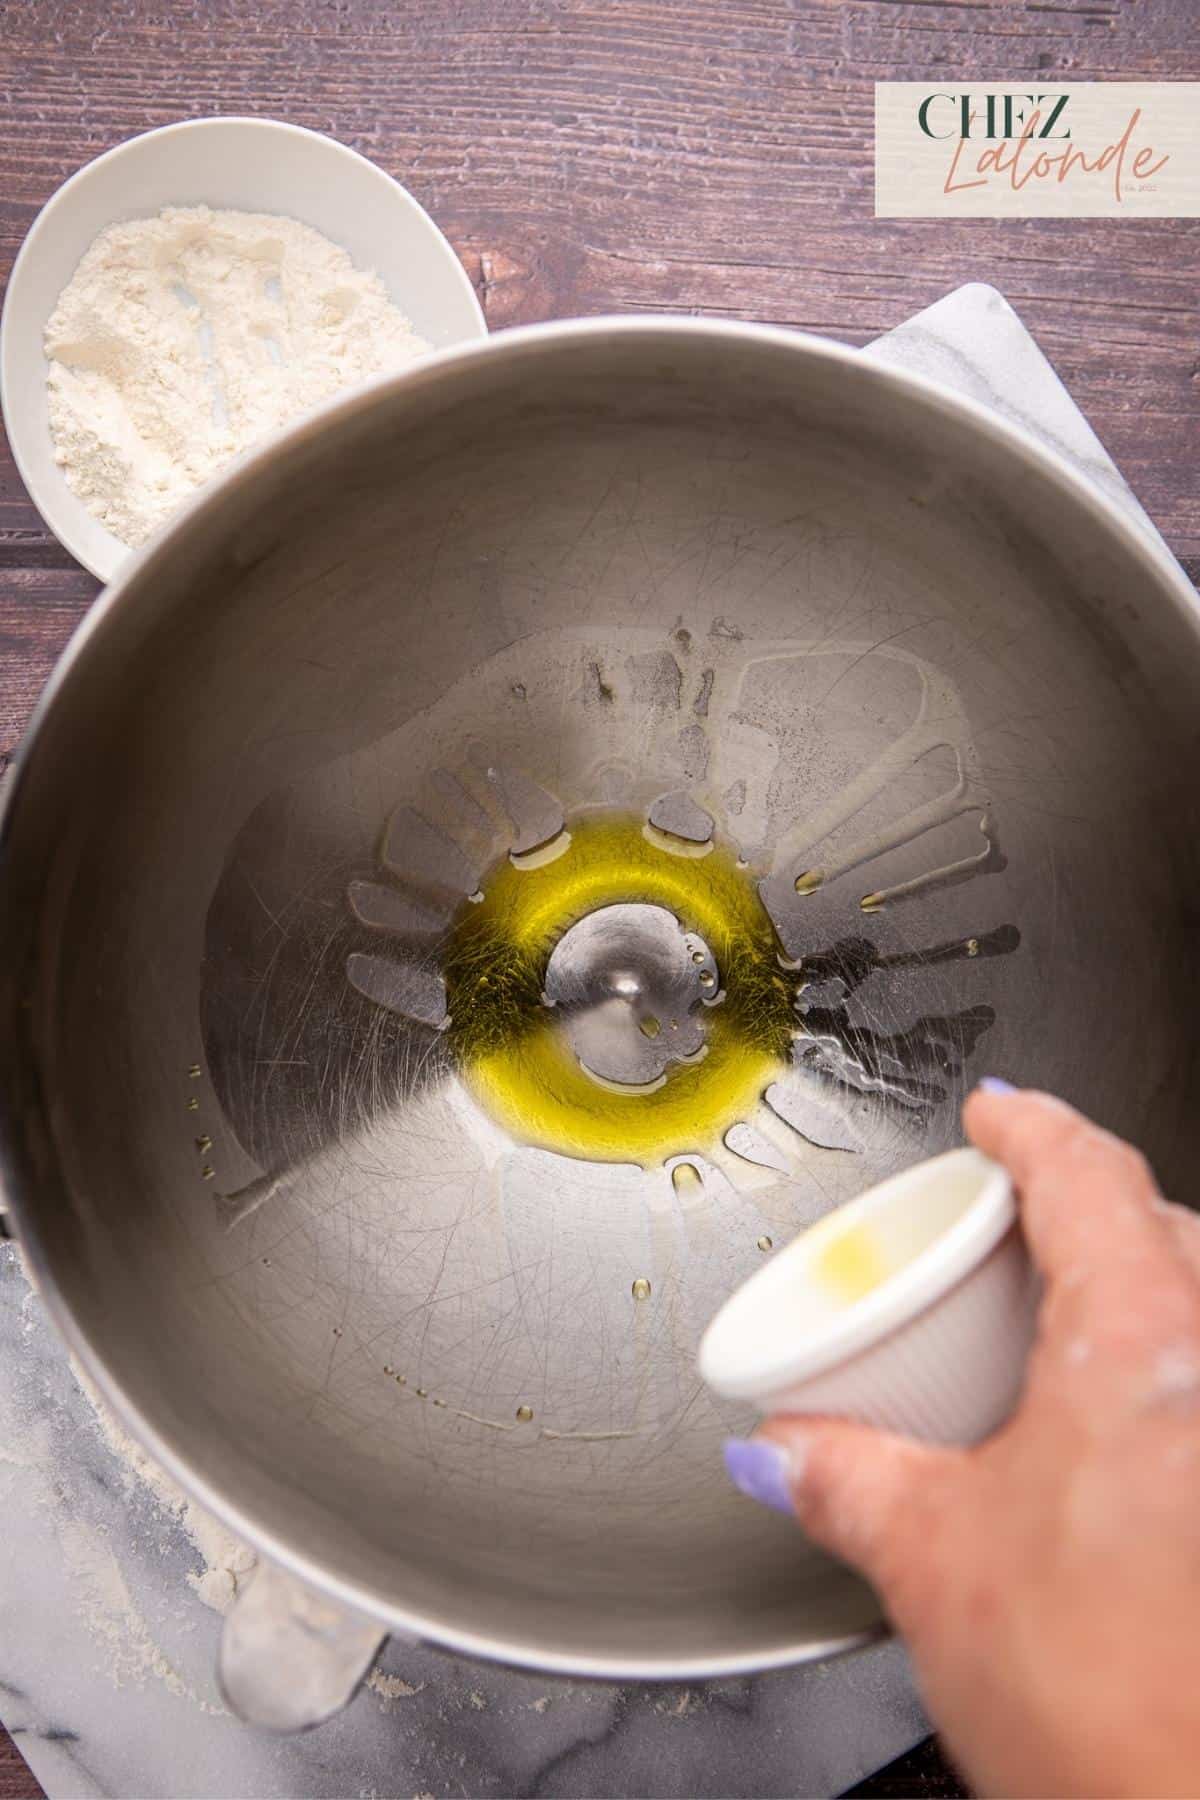 Drizzle a tablespoon of olive oil in the stand mixing bowl and spread it around to prevent sticking.